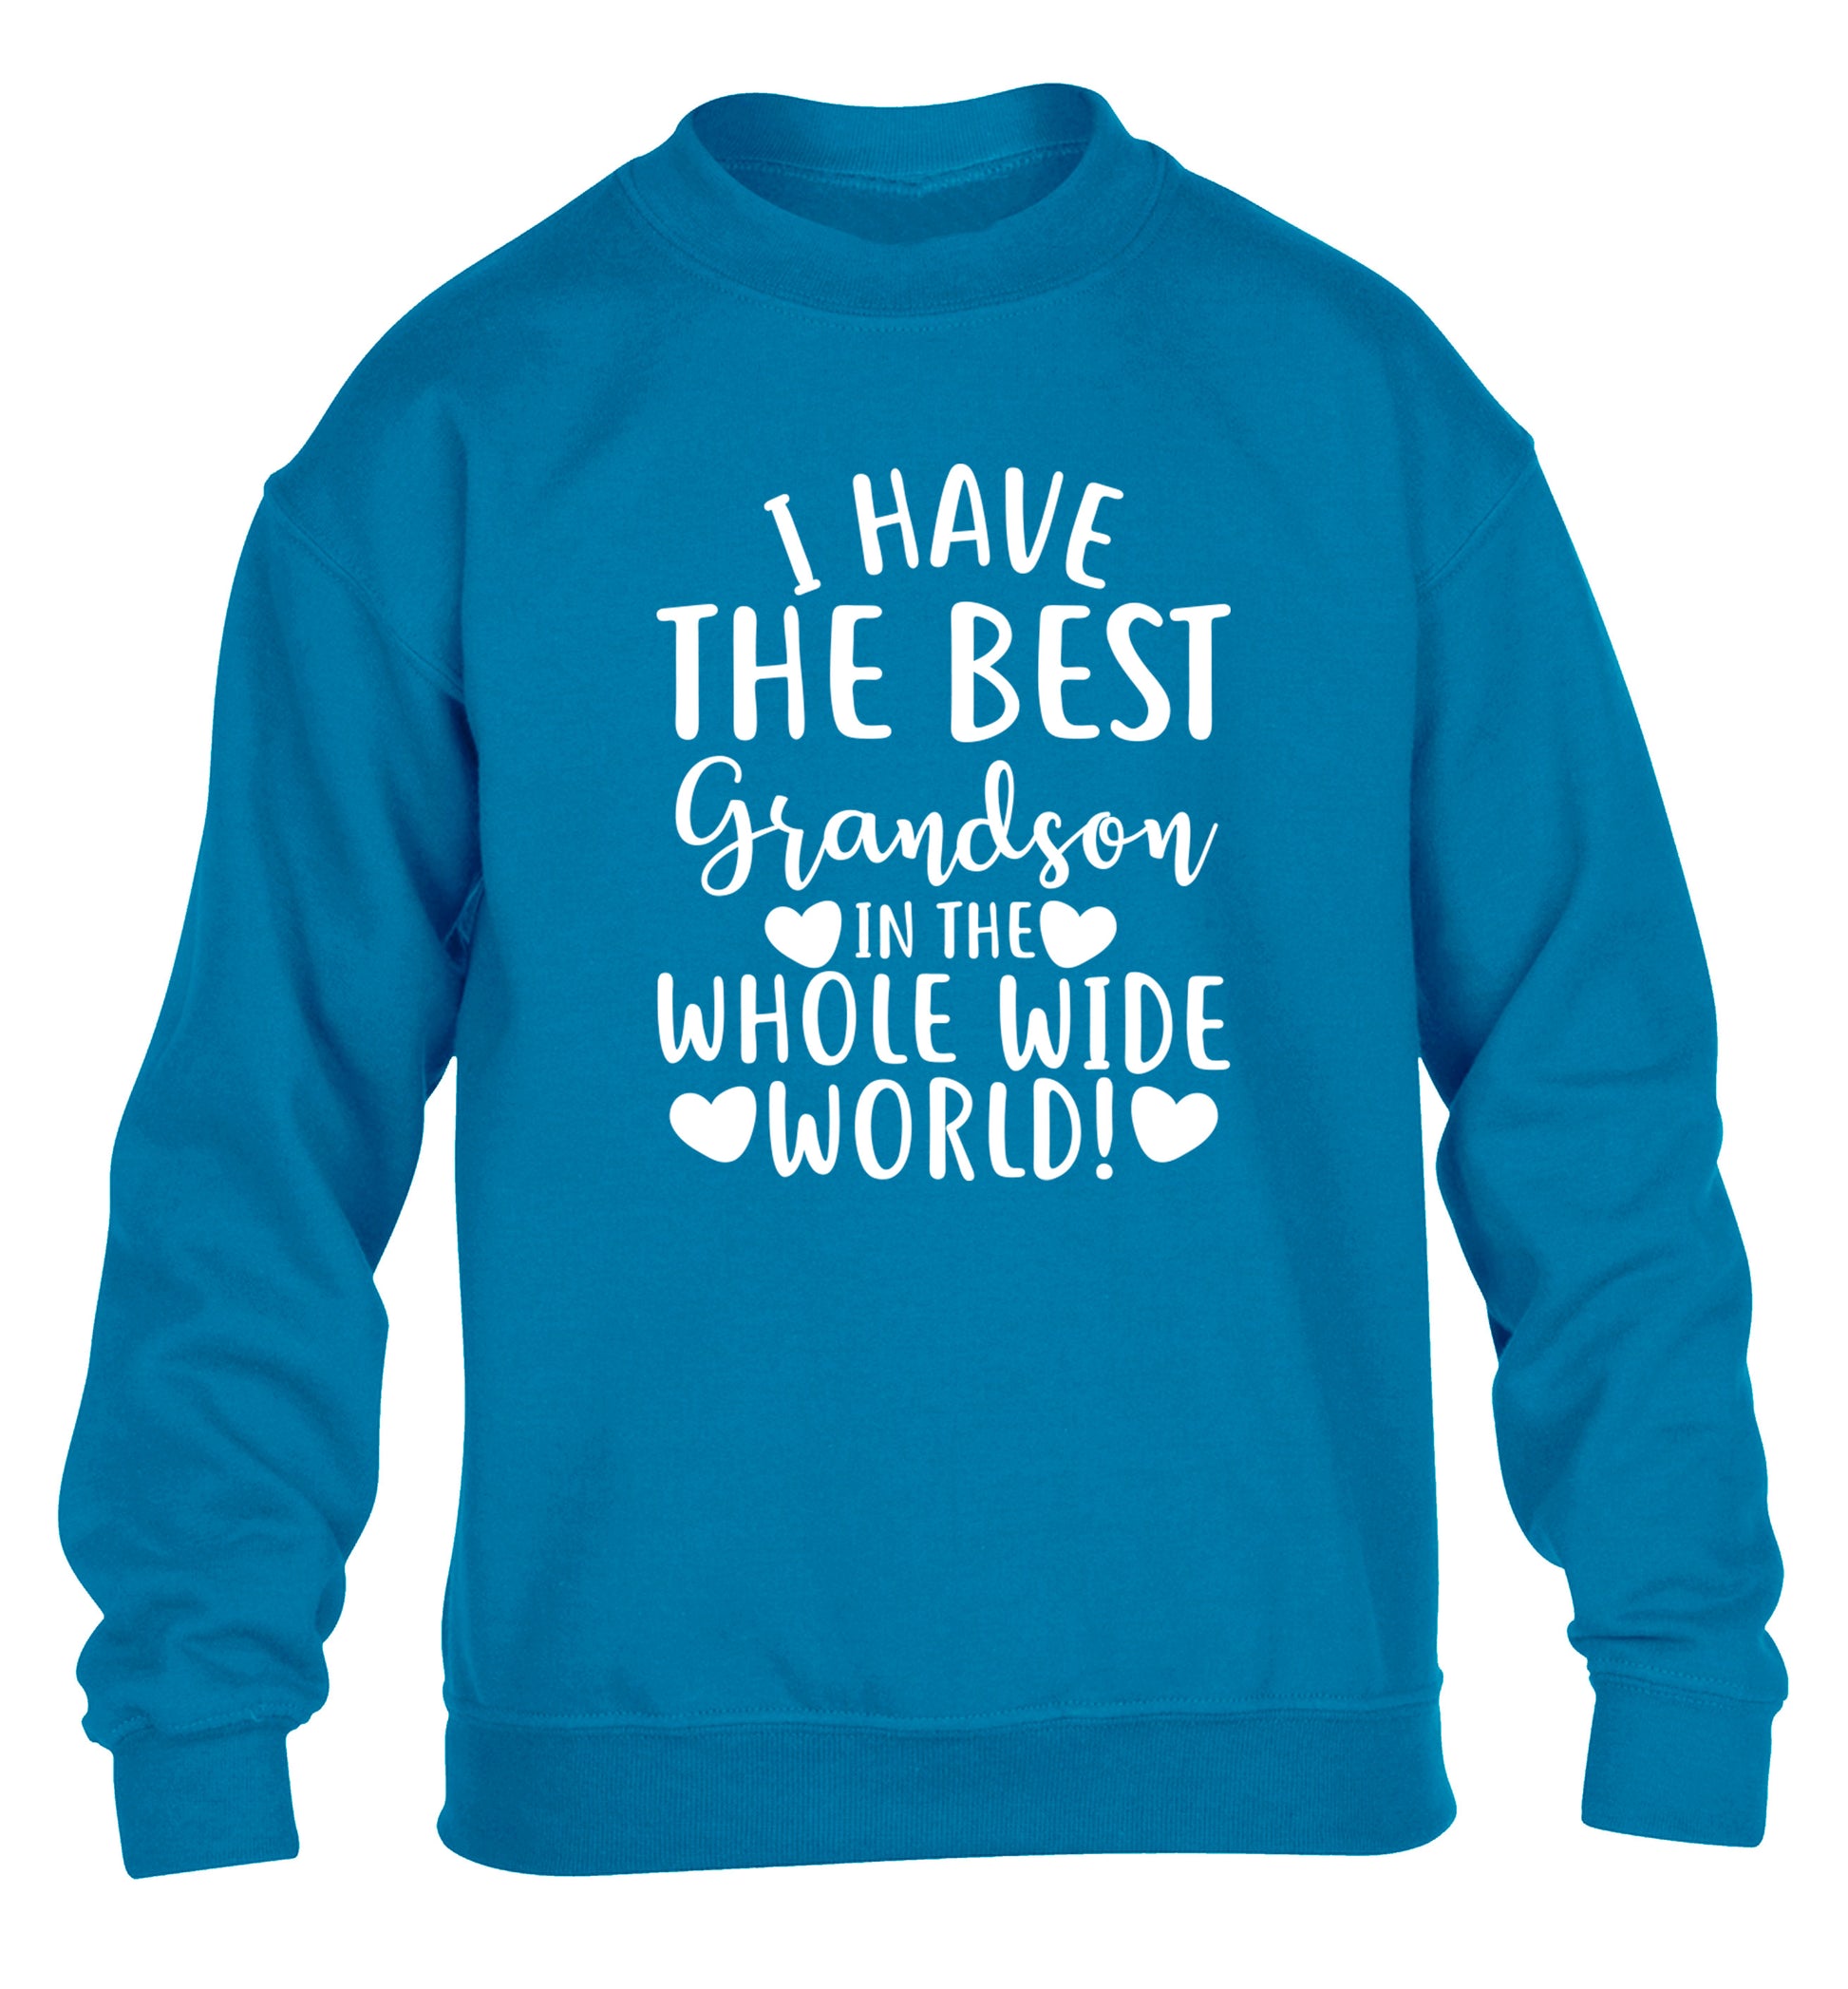 I have the best grandson in the whole wide world! children's blue sweater 12-13 Years